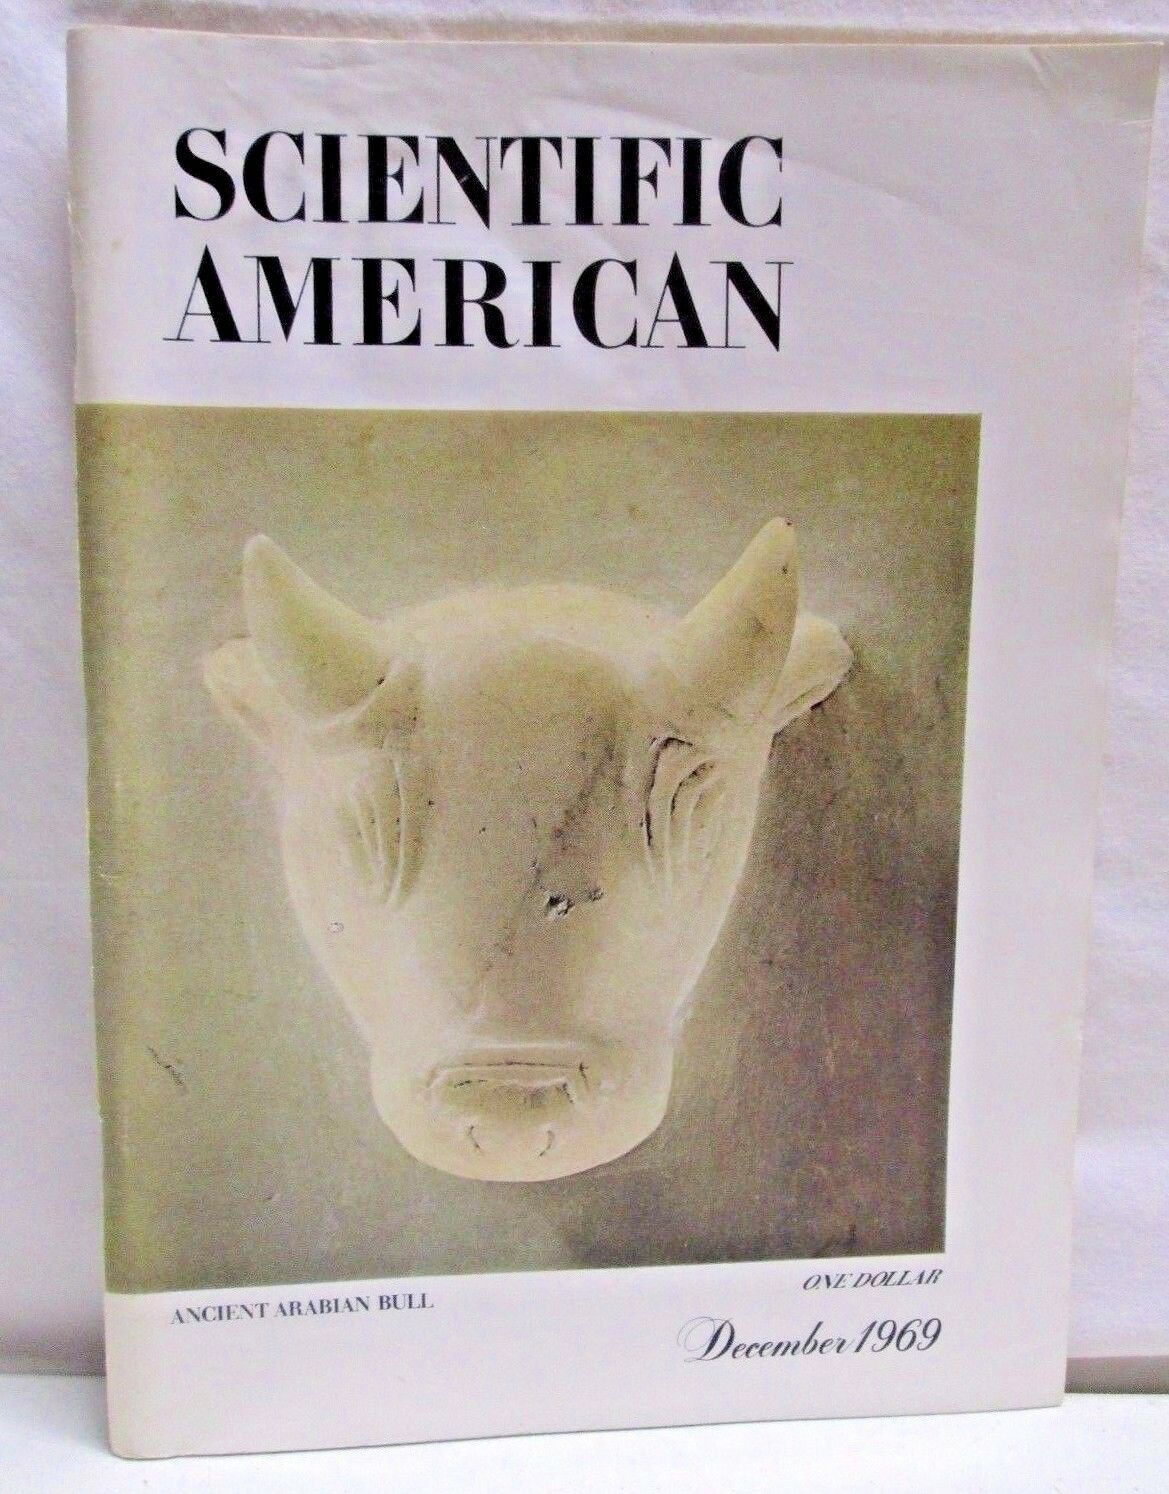 December 1969 of Scientific American, featuring Grinspoon's "Marihuana" article.